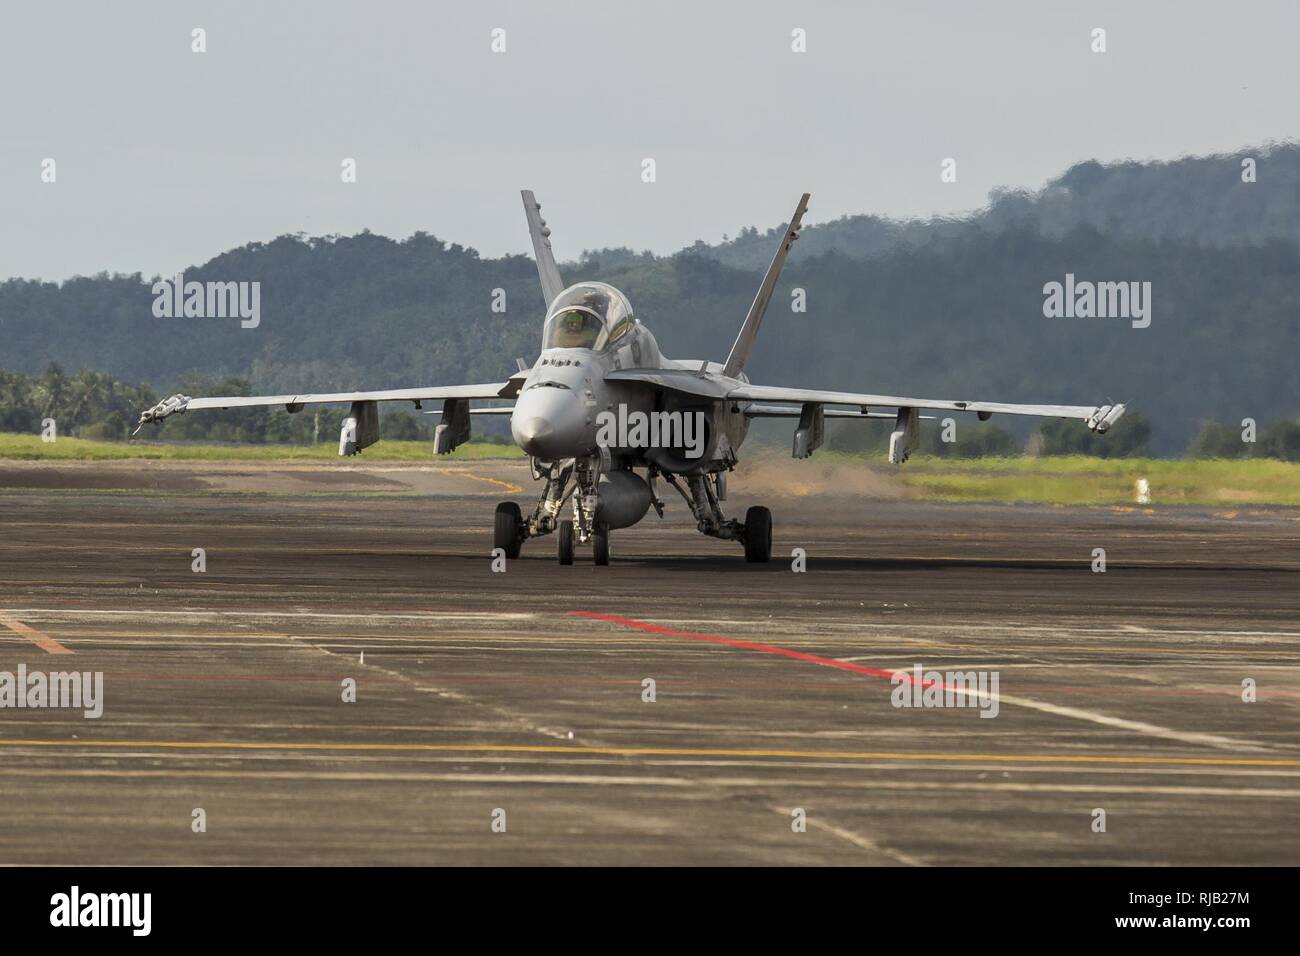 A U.S. Marine Corps F/A-18D Hornet with Marine All-Weather Fighter Attack Squadron (VMFA (AW)) 225, taxis down the flight line during exercise Cope West 17 at Sam Ratulangi International Airport, Indonesia, Nov. 3, 2016. This fighter-focused, bilateral exercise between the U.S. Marine Corps and Indonesian Air Force is designed to enhance the readiness of combined interoperability between the two nations. The combined training offered by this exercise helps prepare the U.S. Marine Corps and Indonesia Air Force to work together in promoting a peaceful Indo-Asia-Pacific region while practicing cl Stock Photo